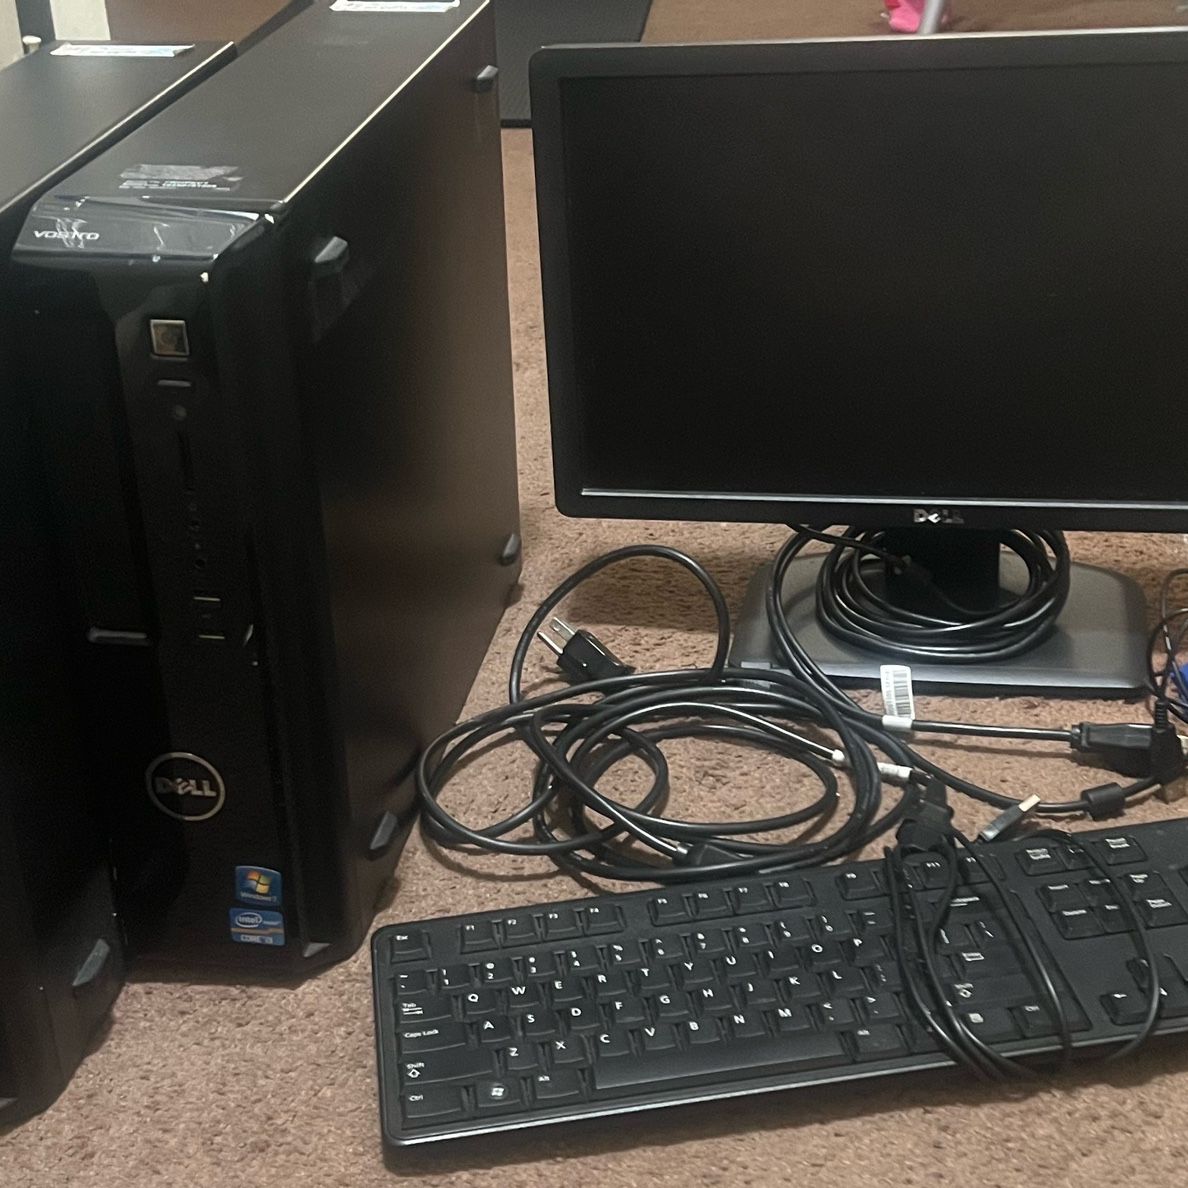 (2) DELL COMPUTERS $100.00 For ALL!!